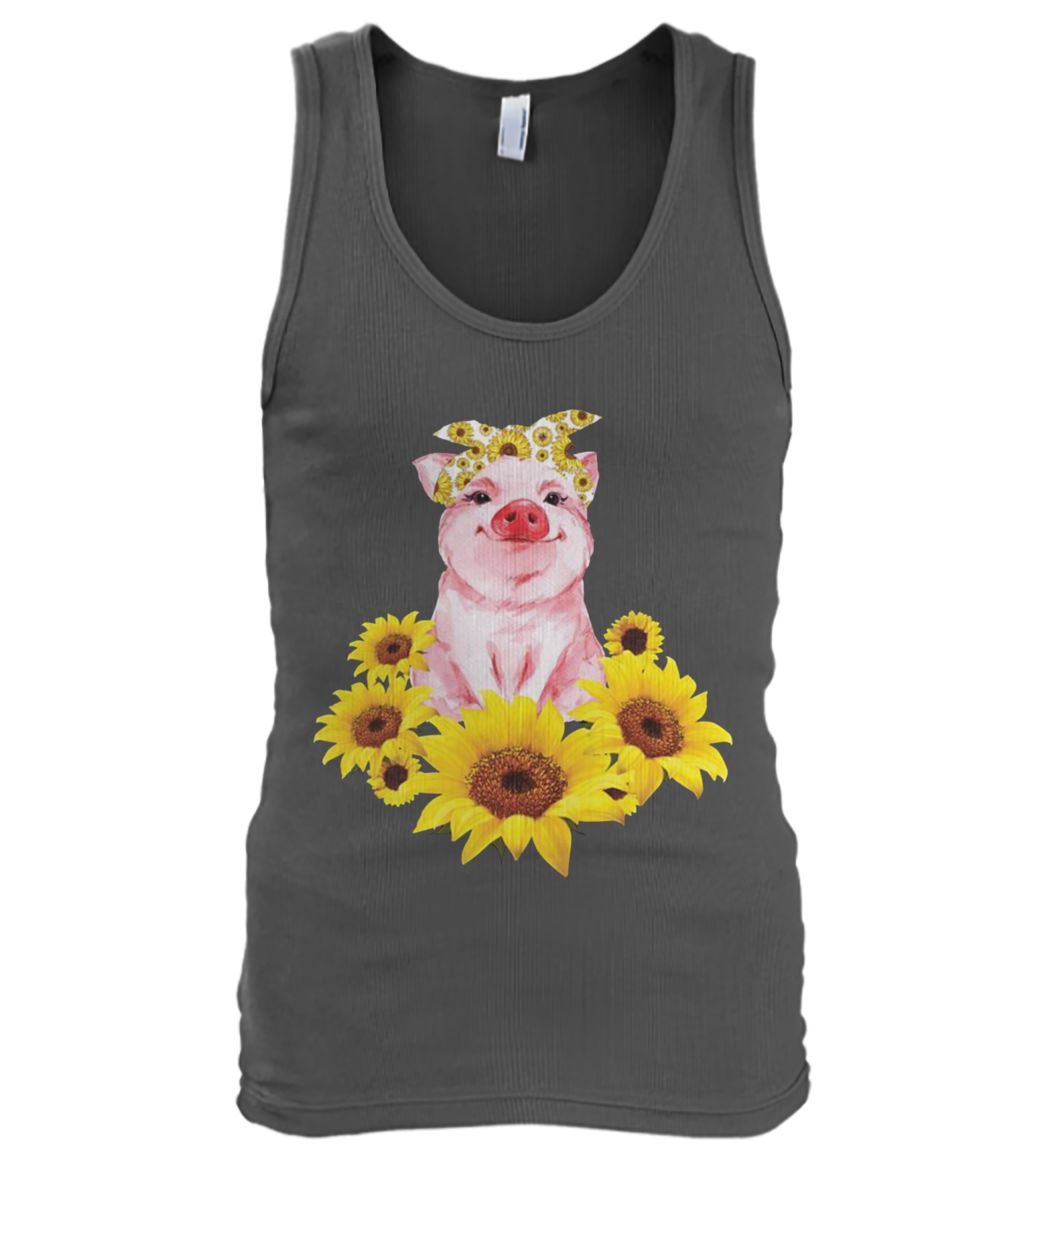 Cute pig with sunflowers men's tank top